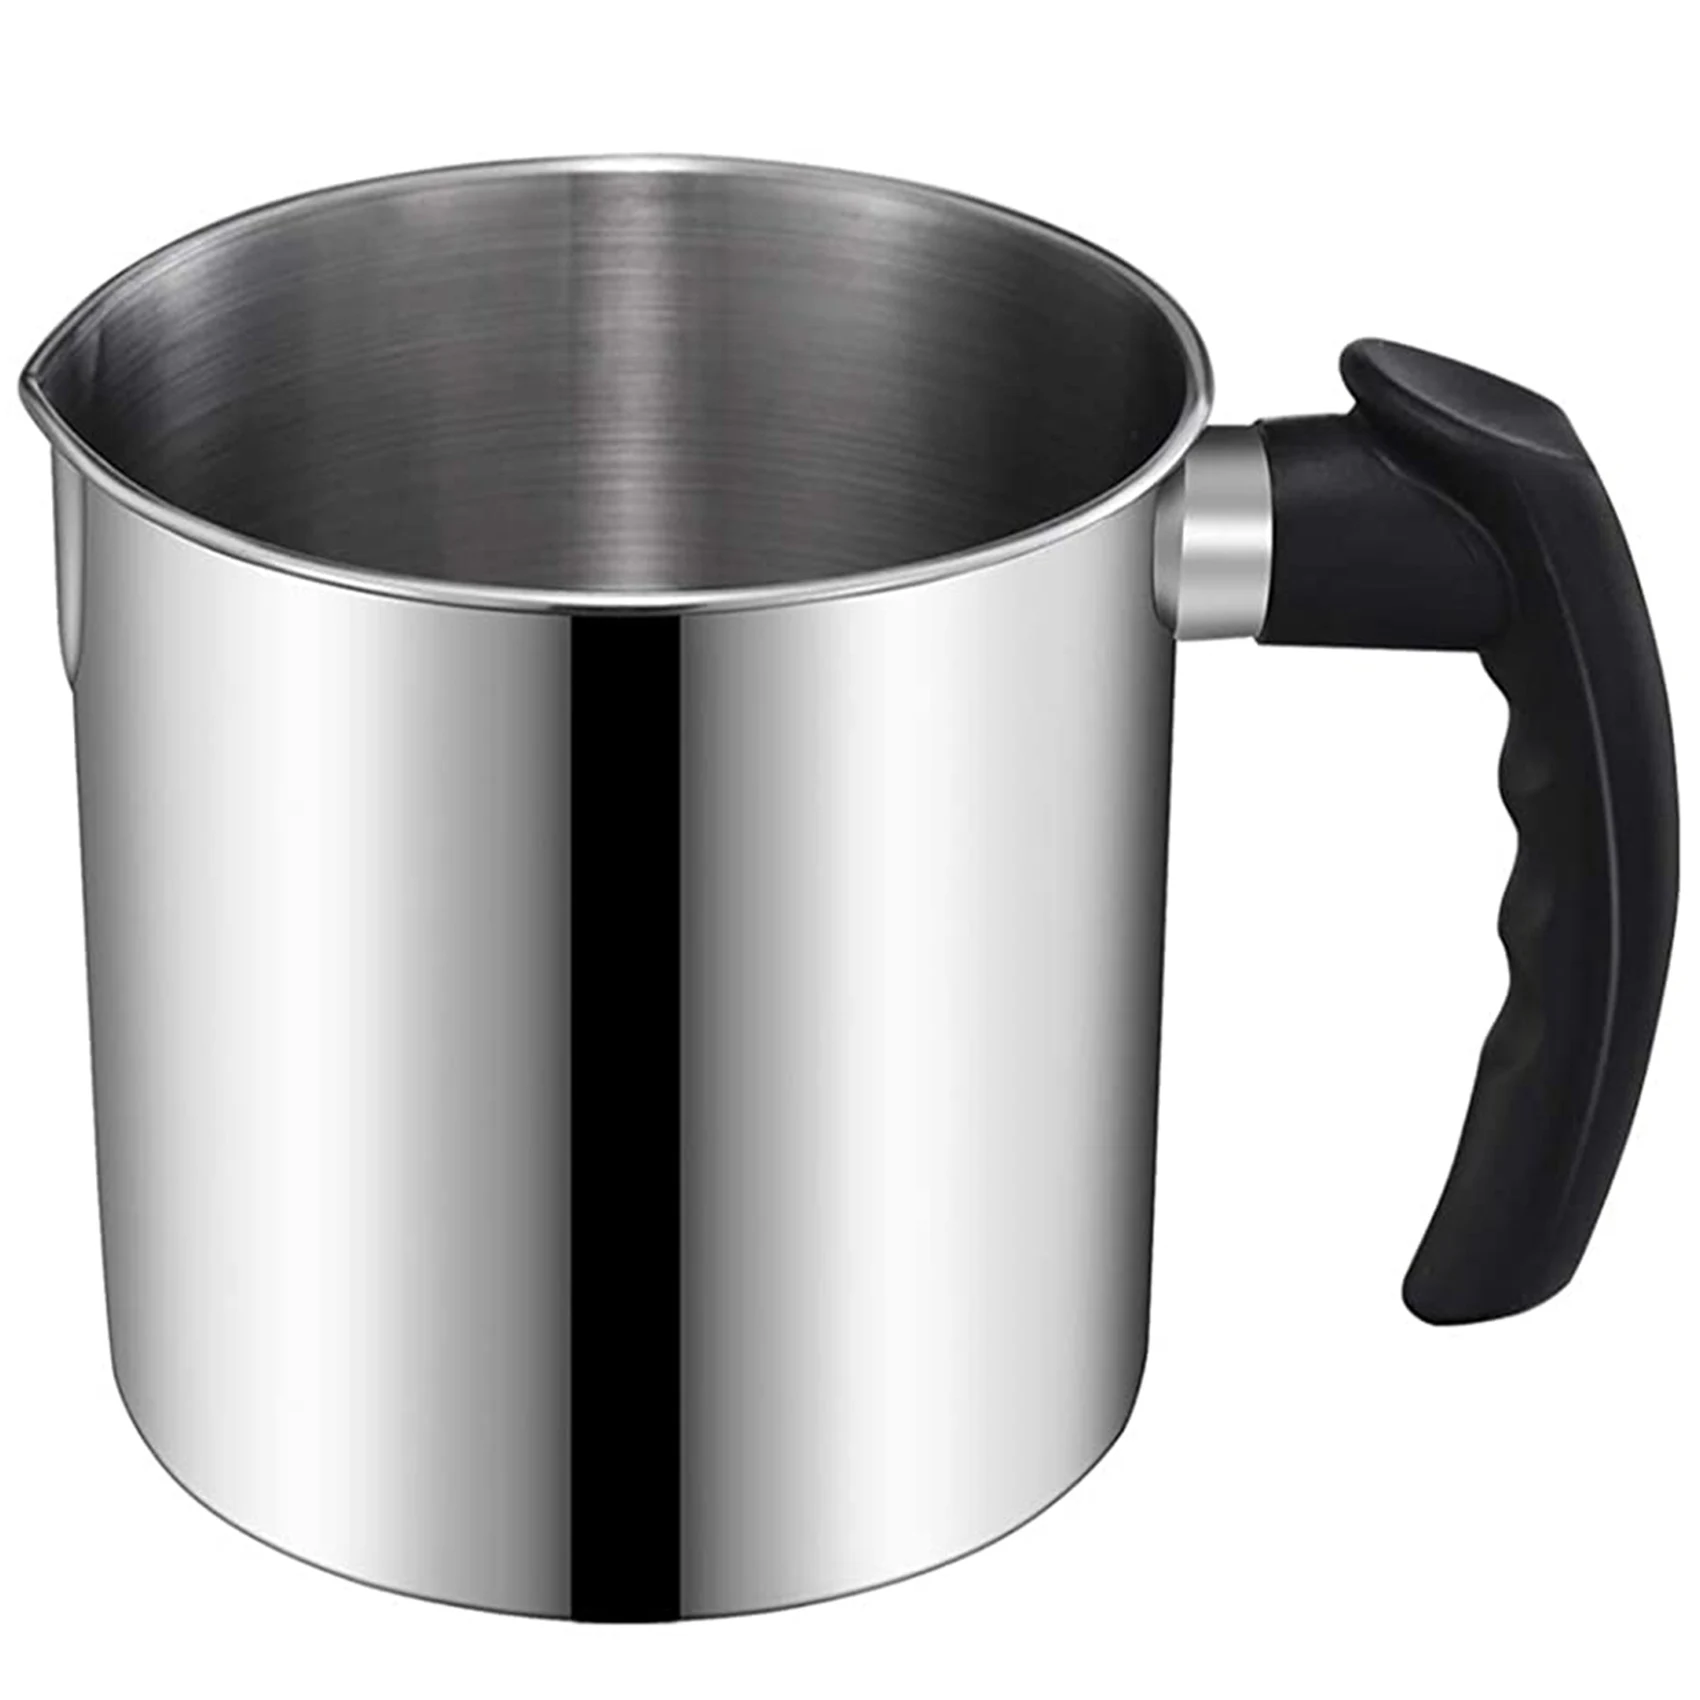 Candle Making Pouring Pot, 44 Oz Double Boiler Wax Melting P